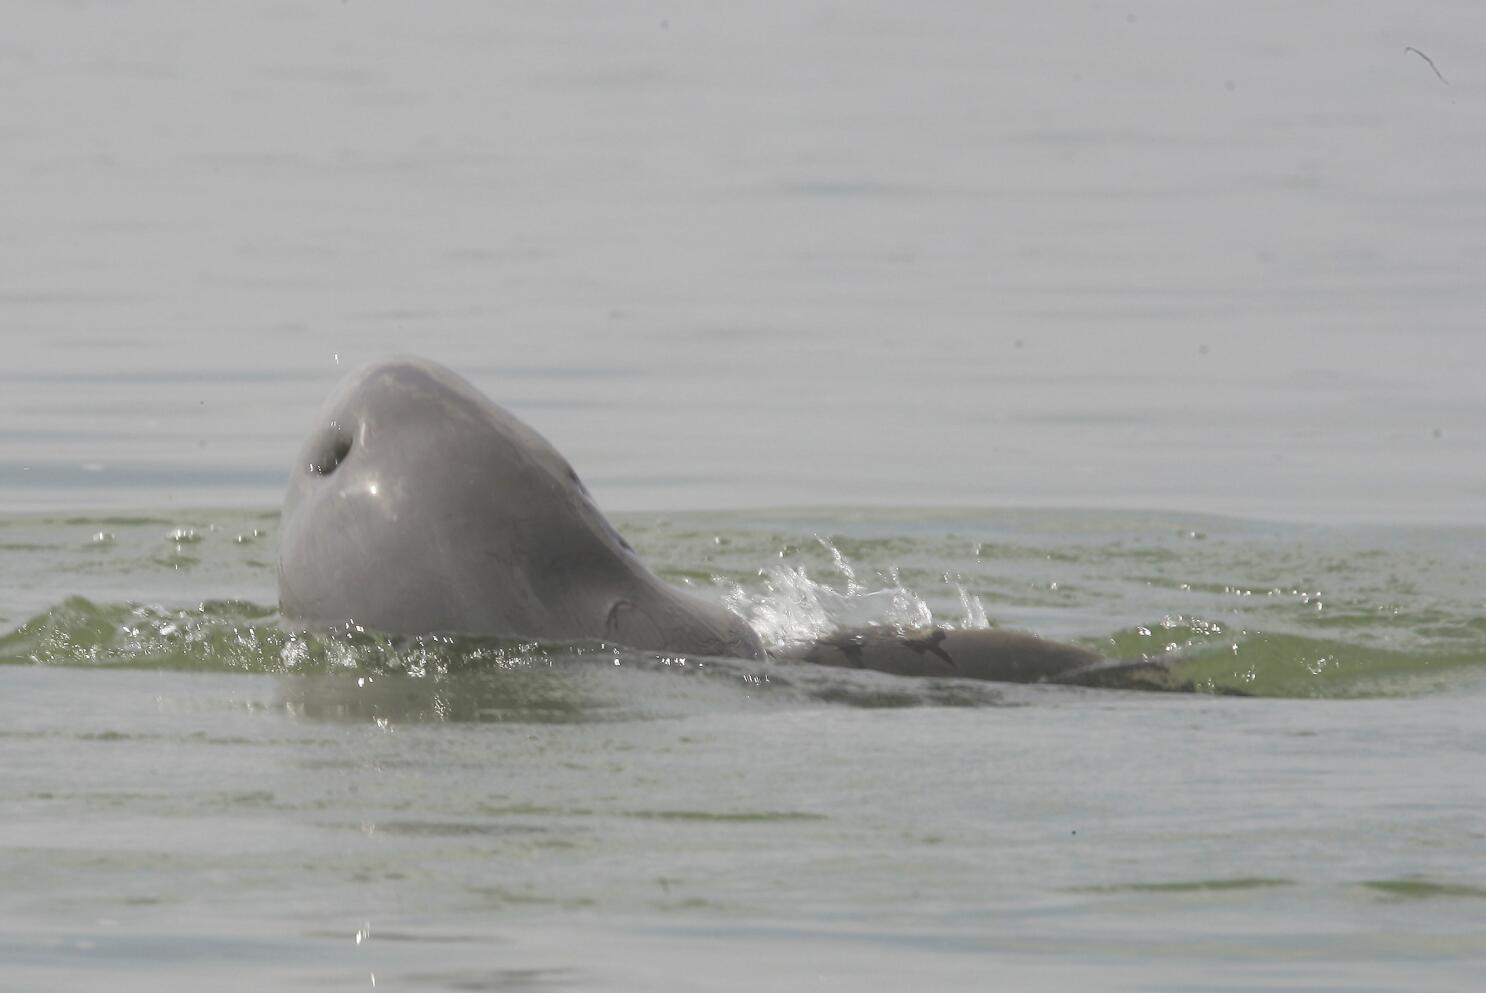 irrawaddy river dolphin